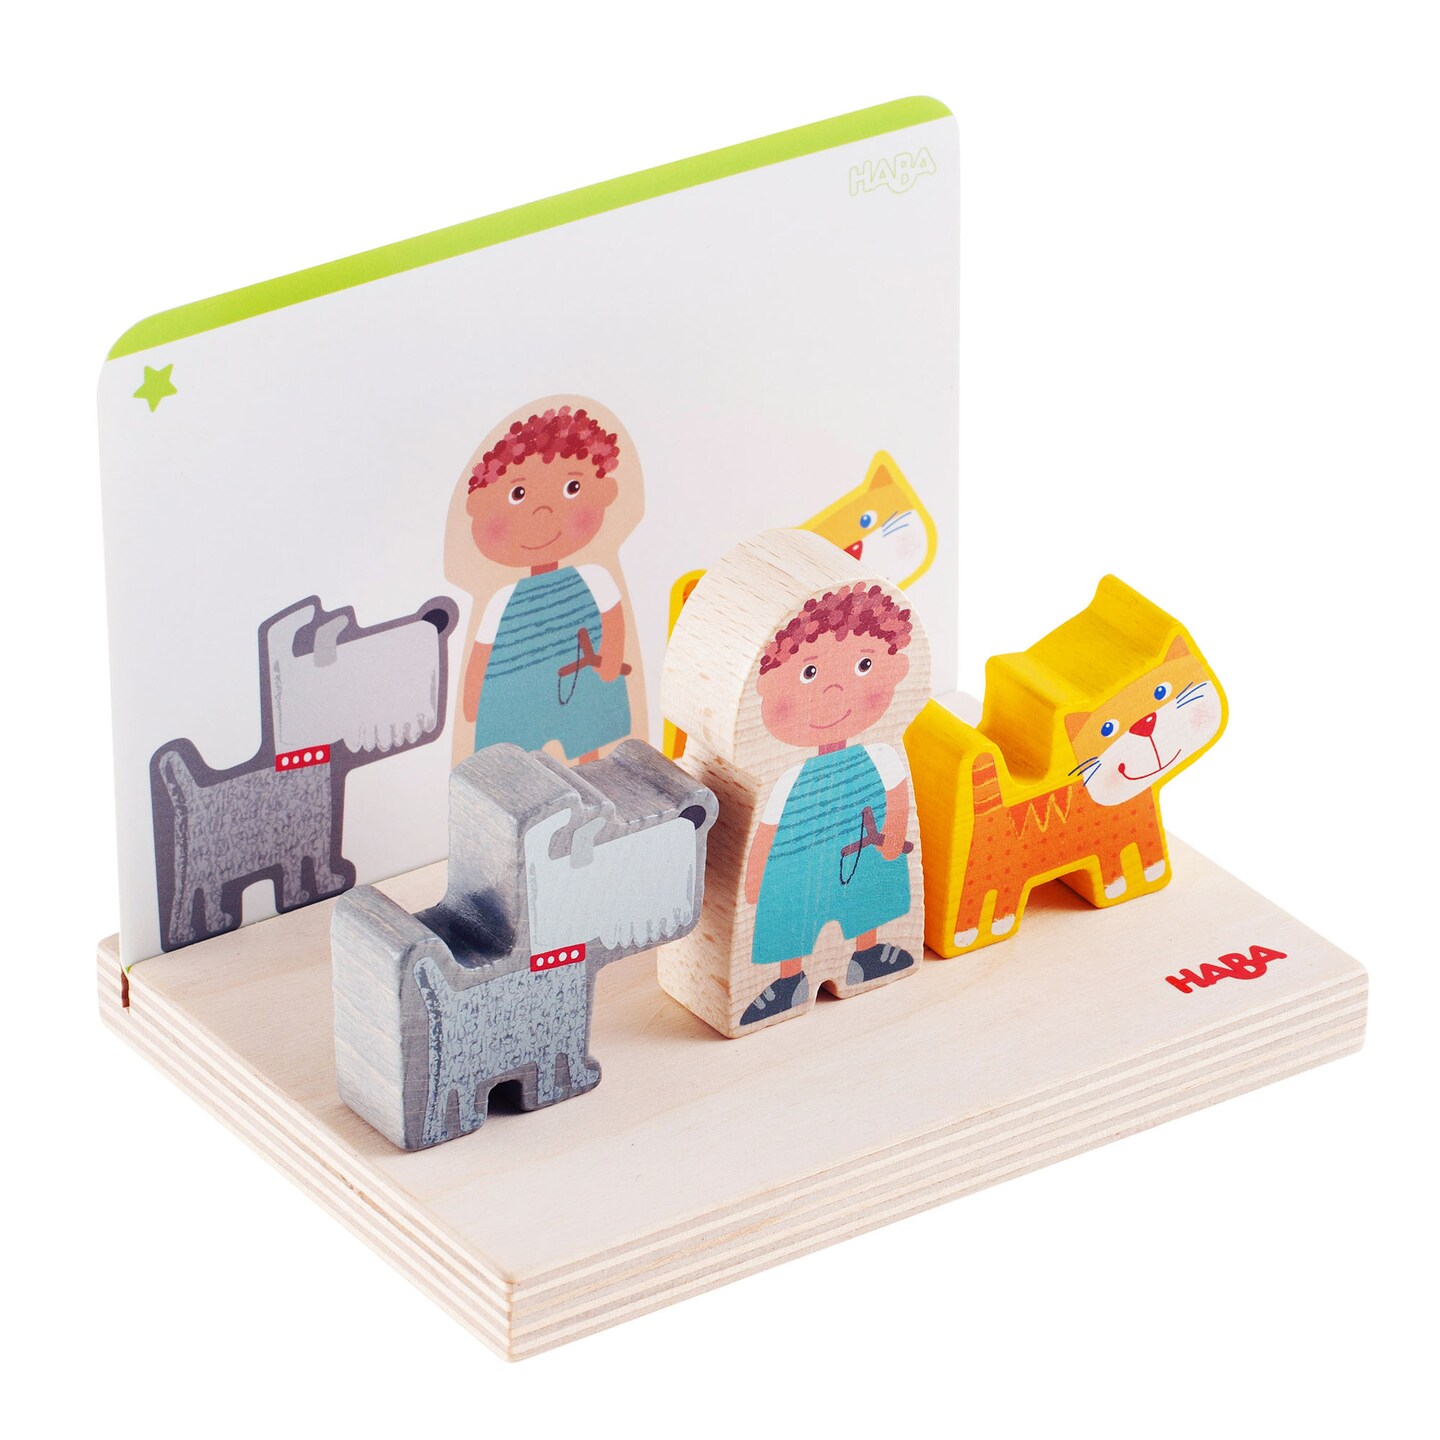 HABA Fire On The Farm Stacking Toy (Made in Germany)